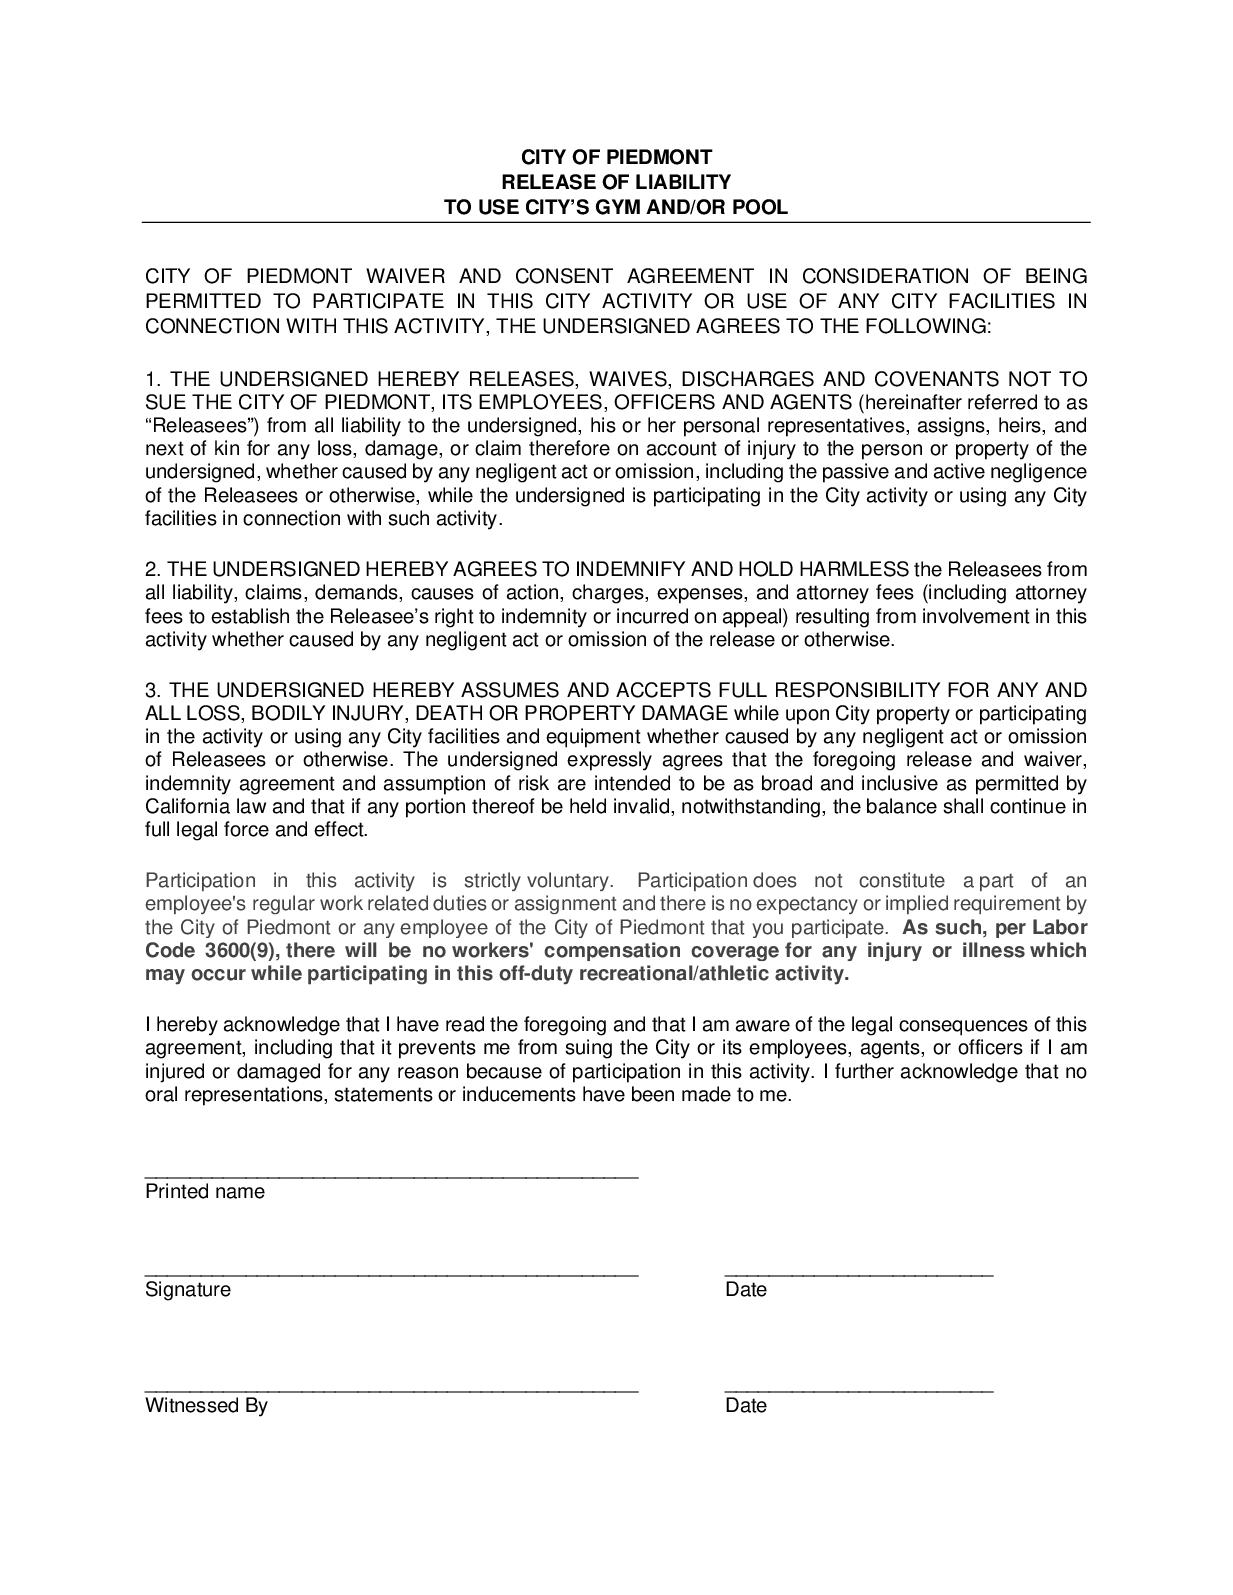 Liability Release Agreement Calamo Release Of Liability Form For Piedmont Gym